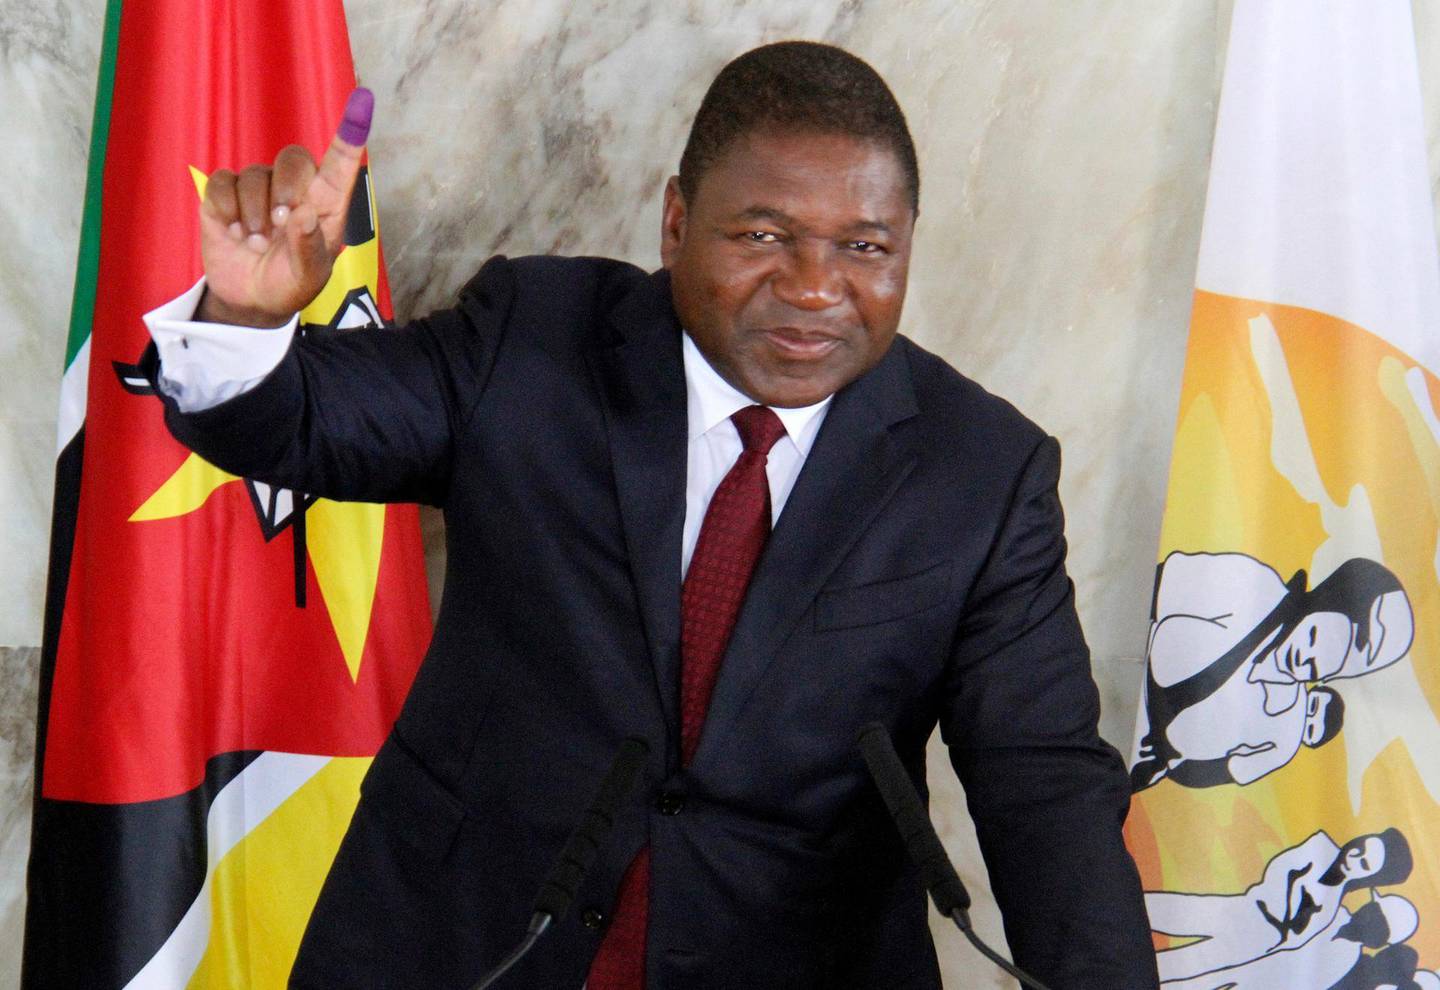 FILE - In this Tuesday, Oct. 15, 2019 file photo, Mozambican President Felipe Nyusi poses at a polling station where he cast his vote in Maputo. Nyusi is to be sworn in Wednesday, Jan. 15, 2020 for a second and final term in Maputo after five turbulent years in office and facing two armed insurgencies as well as economic opportunities. (AP Photo/Ferhat Momade/File)